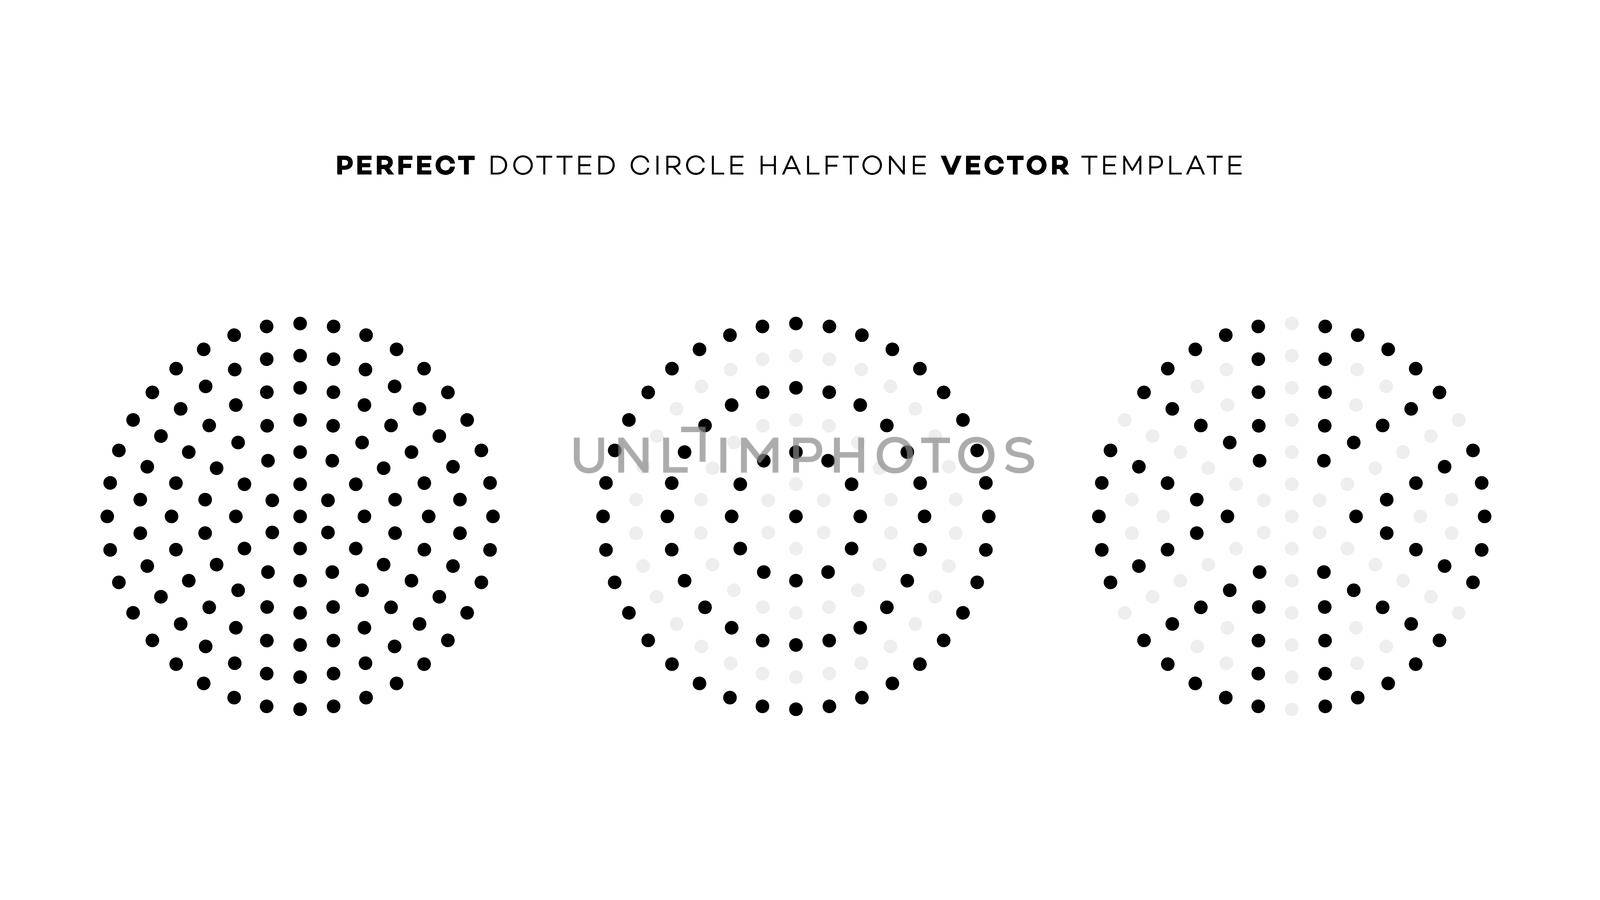 Vector geometric perfect dotted halftone circle. Vector design element. Overlay texture. Branding element by Yarkee